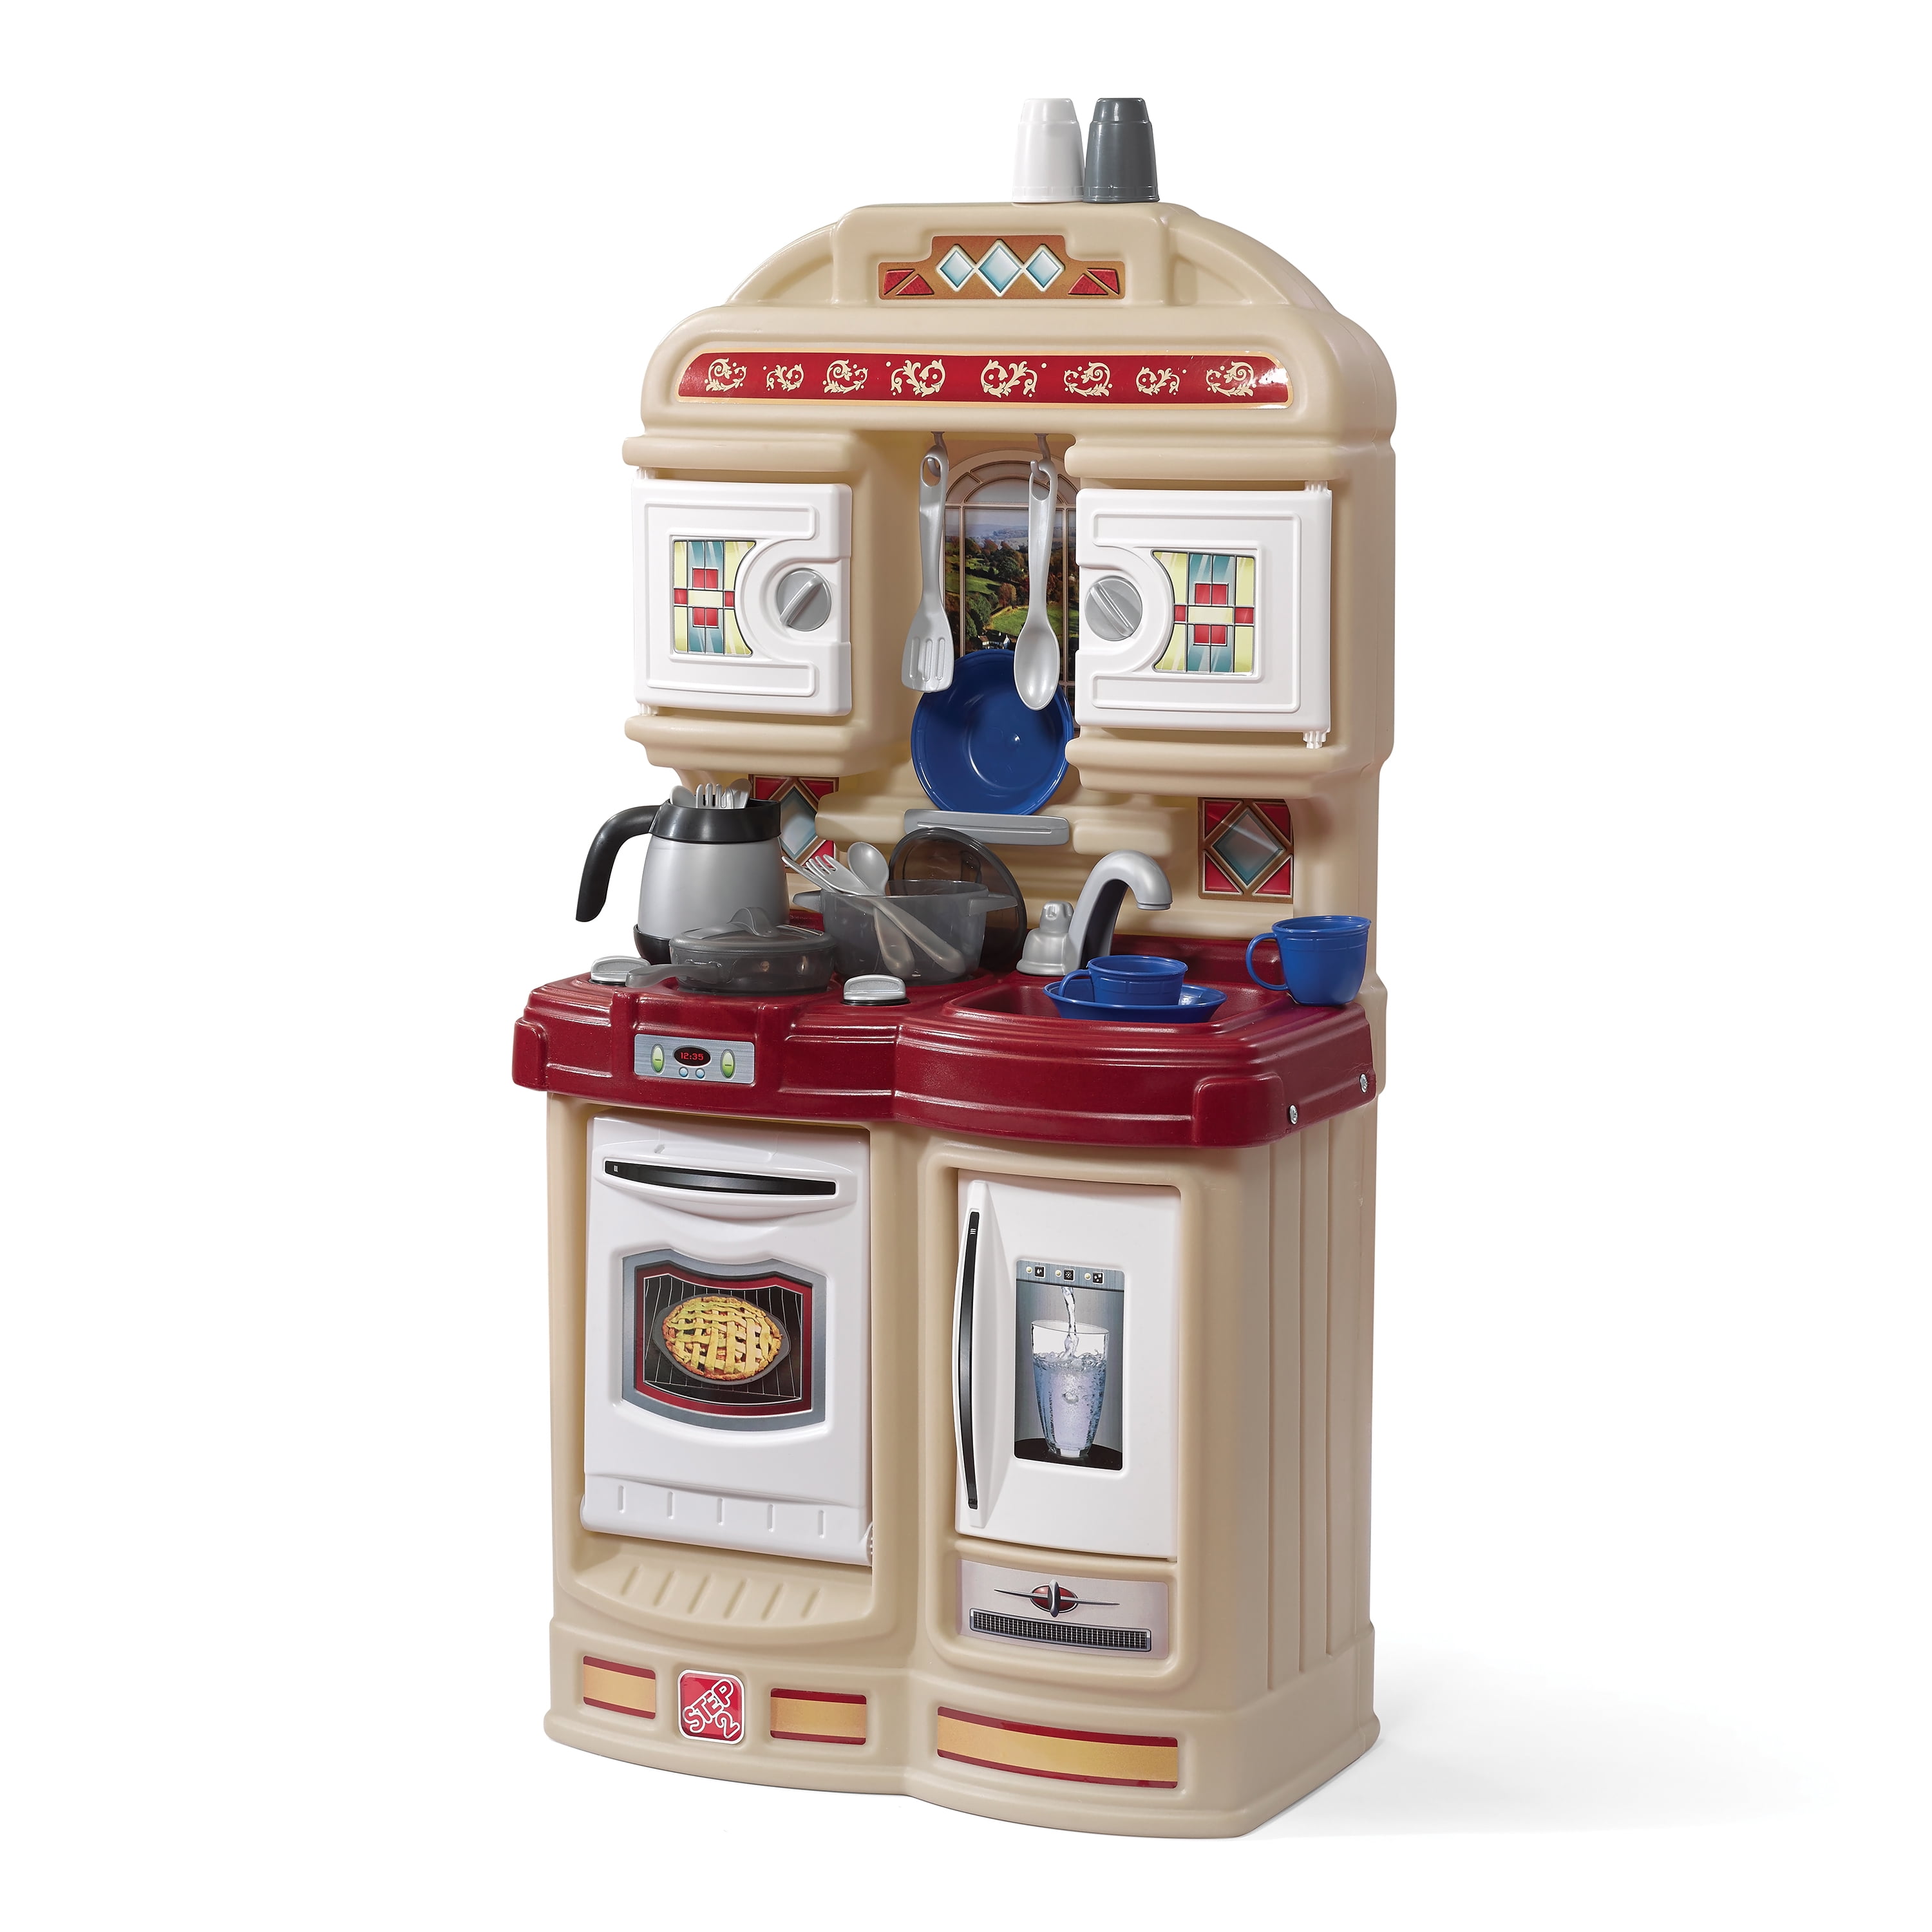 Details about   Red Kitchen Play Set Pretend Baker Kids Toy Cooking Playset Girls Boys Gift US 